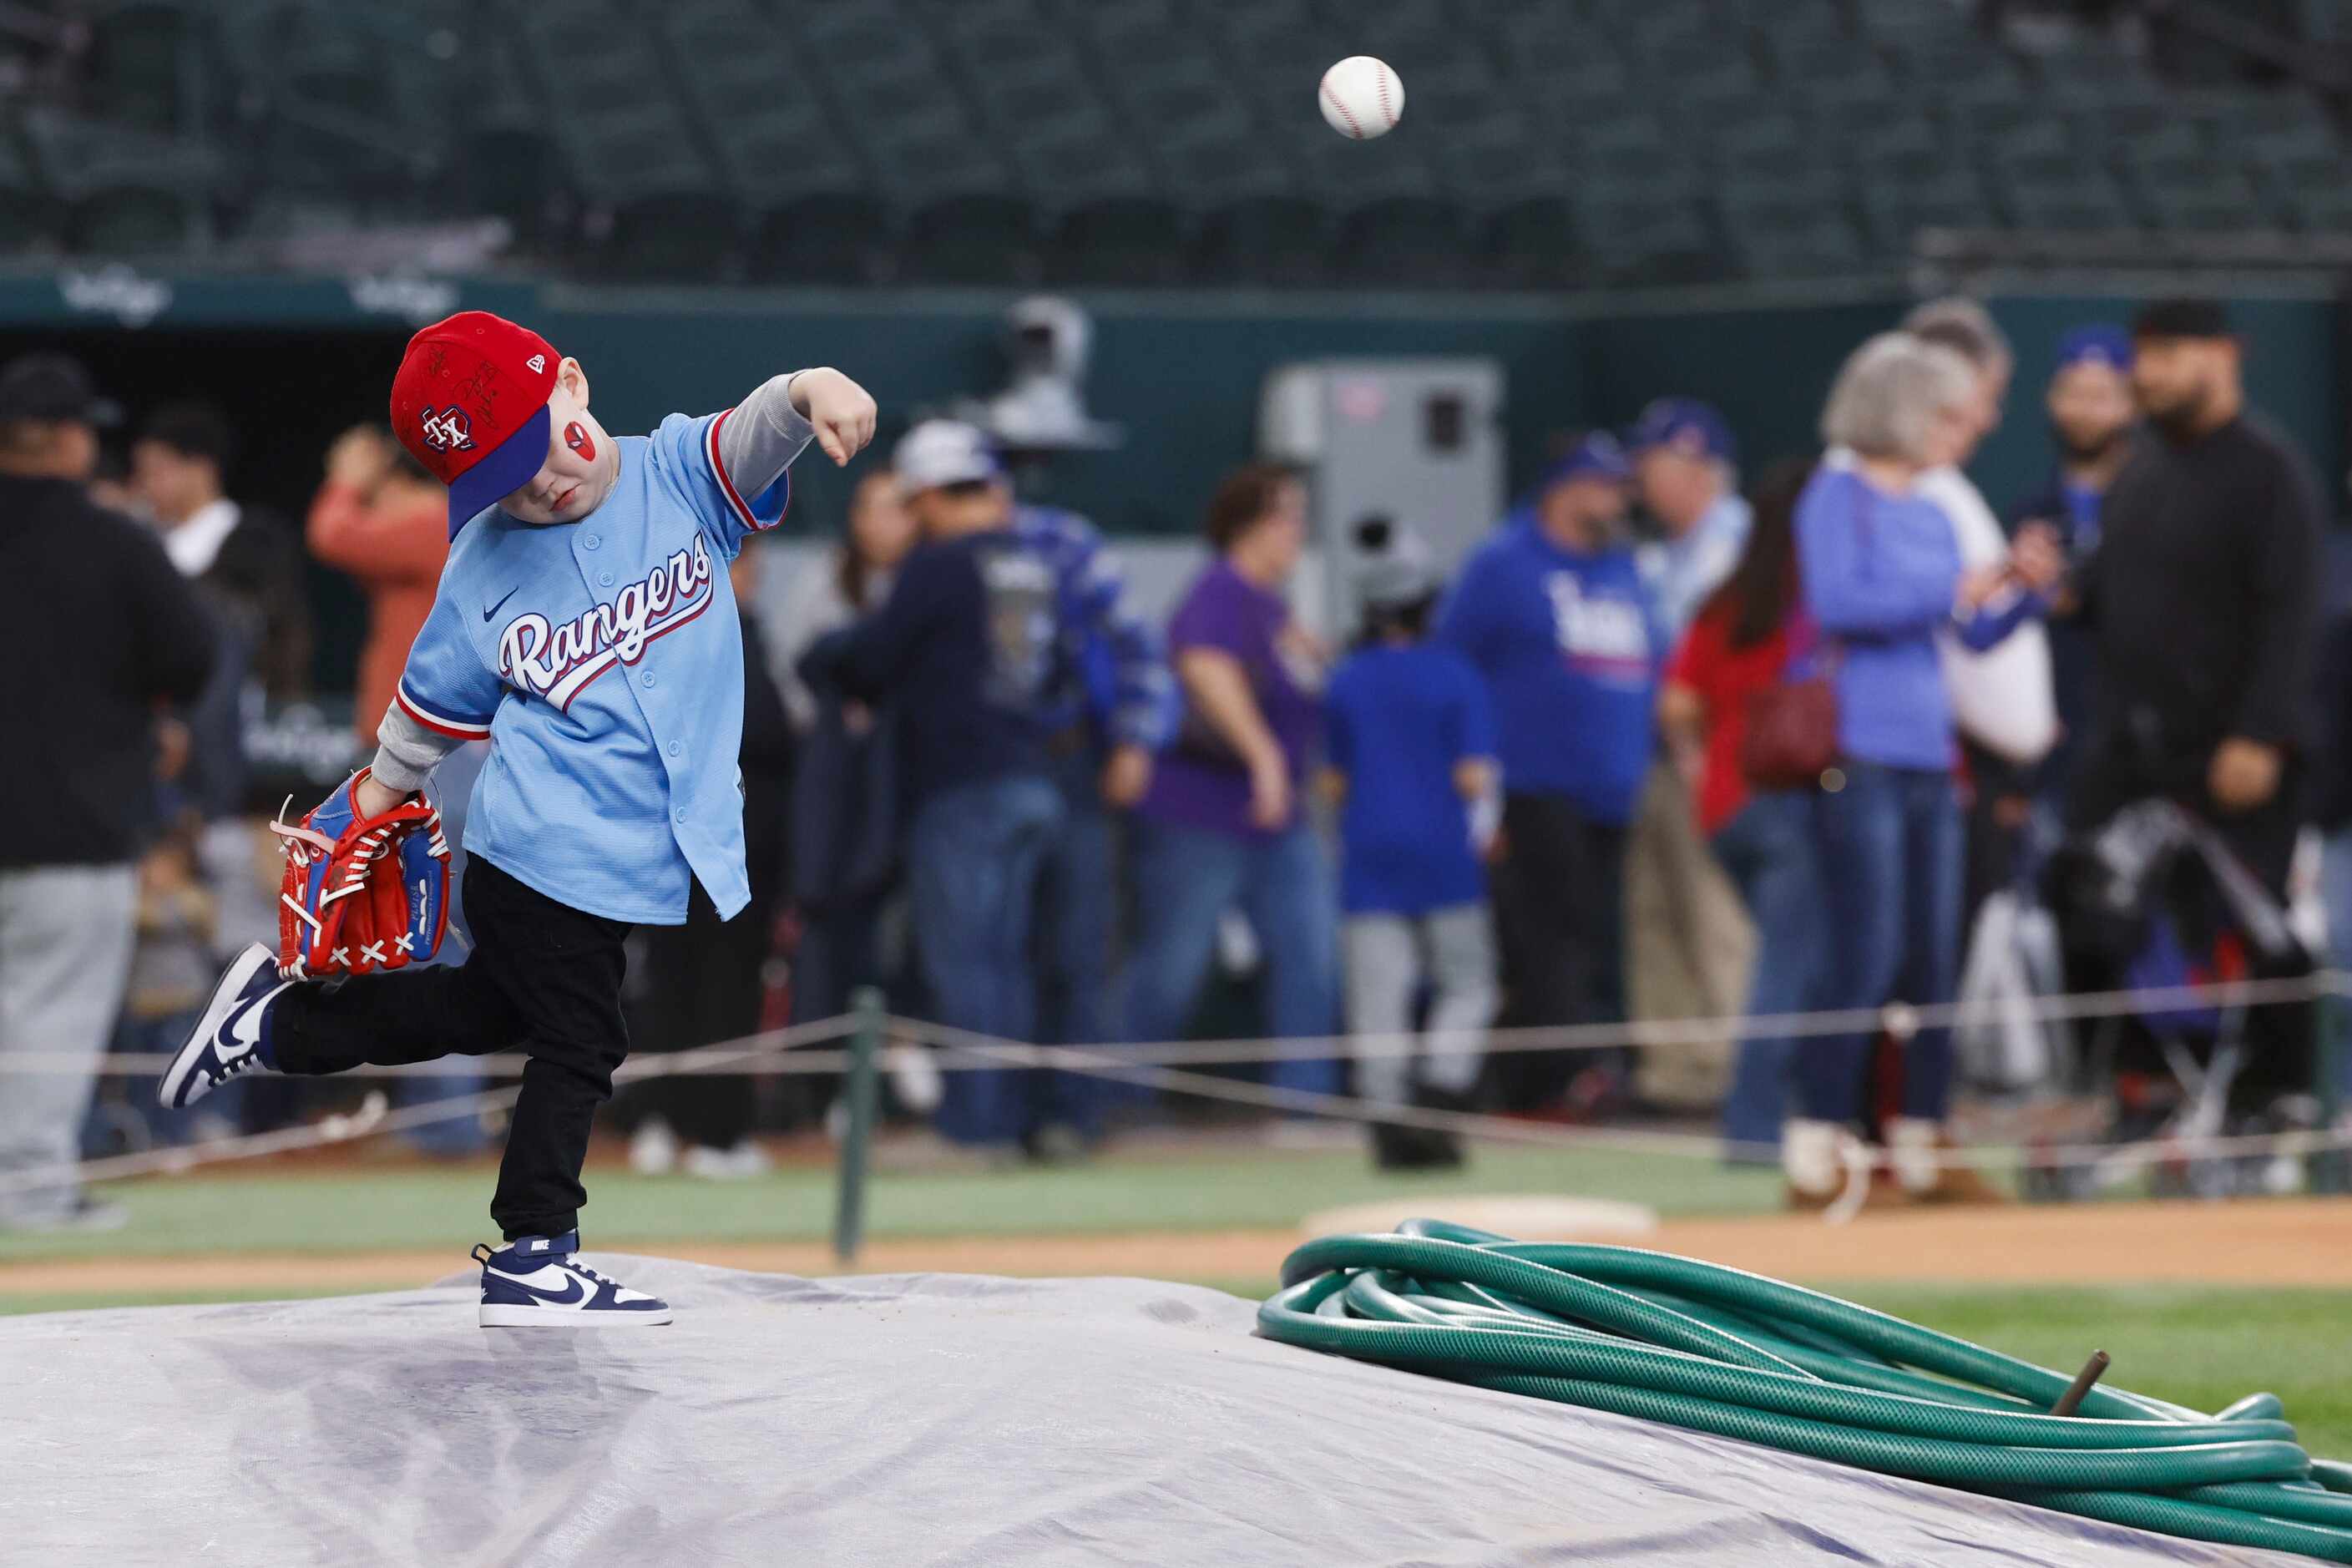 Cain Chandler, 3, throws a pitch from the pitcher’s mound during Texas Rangers Fan Fest on,...